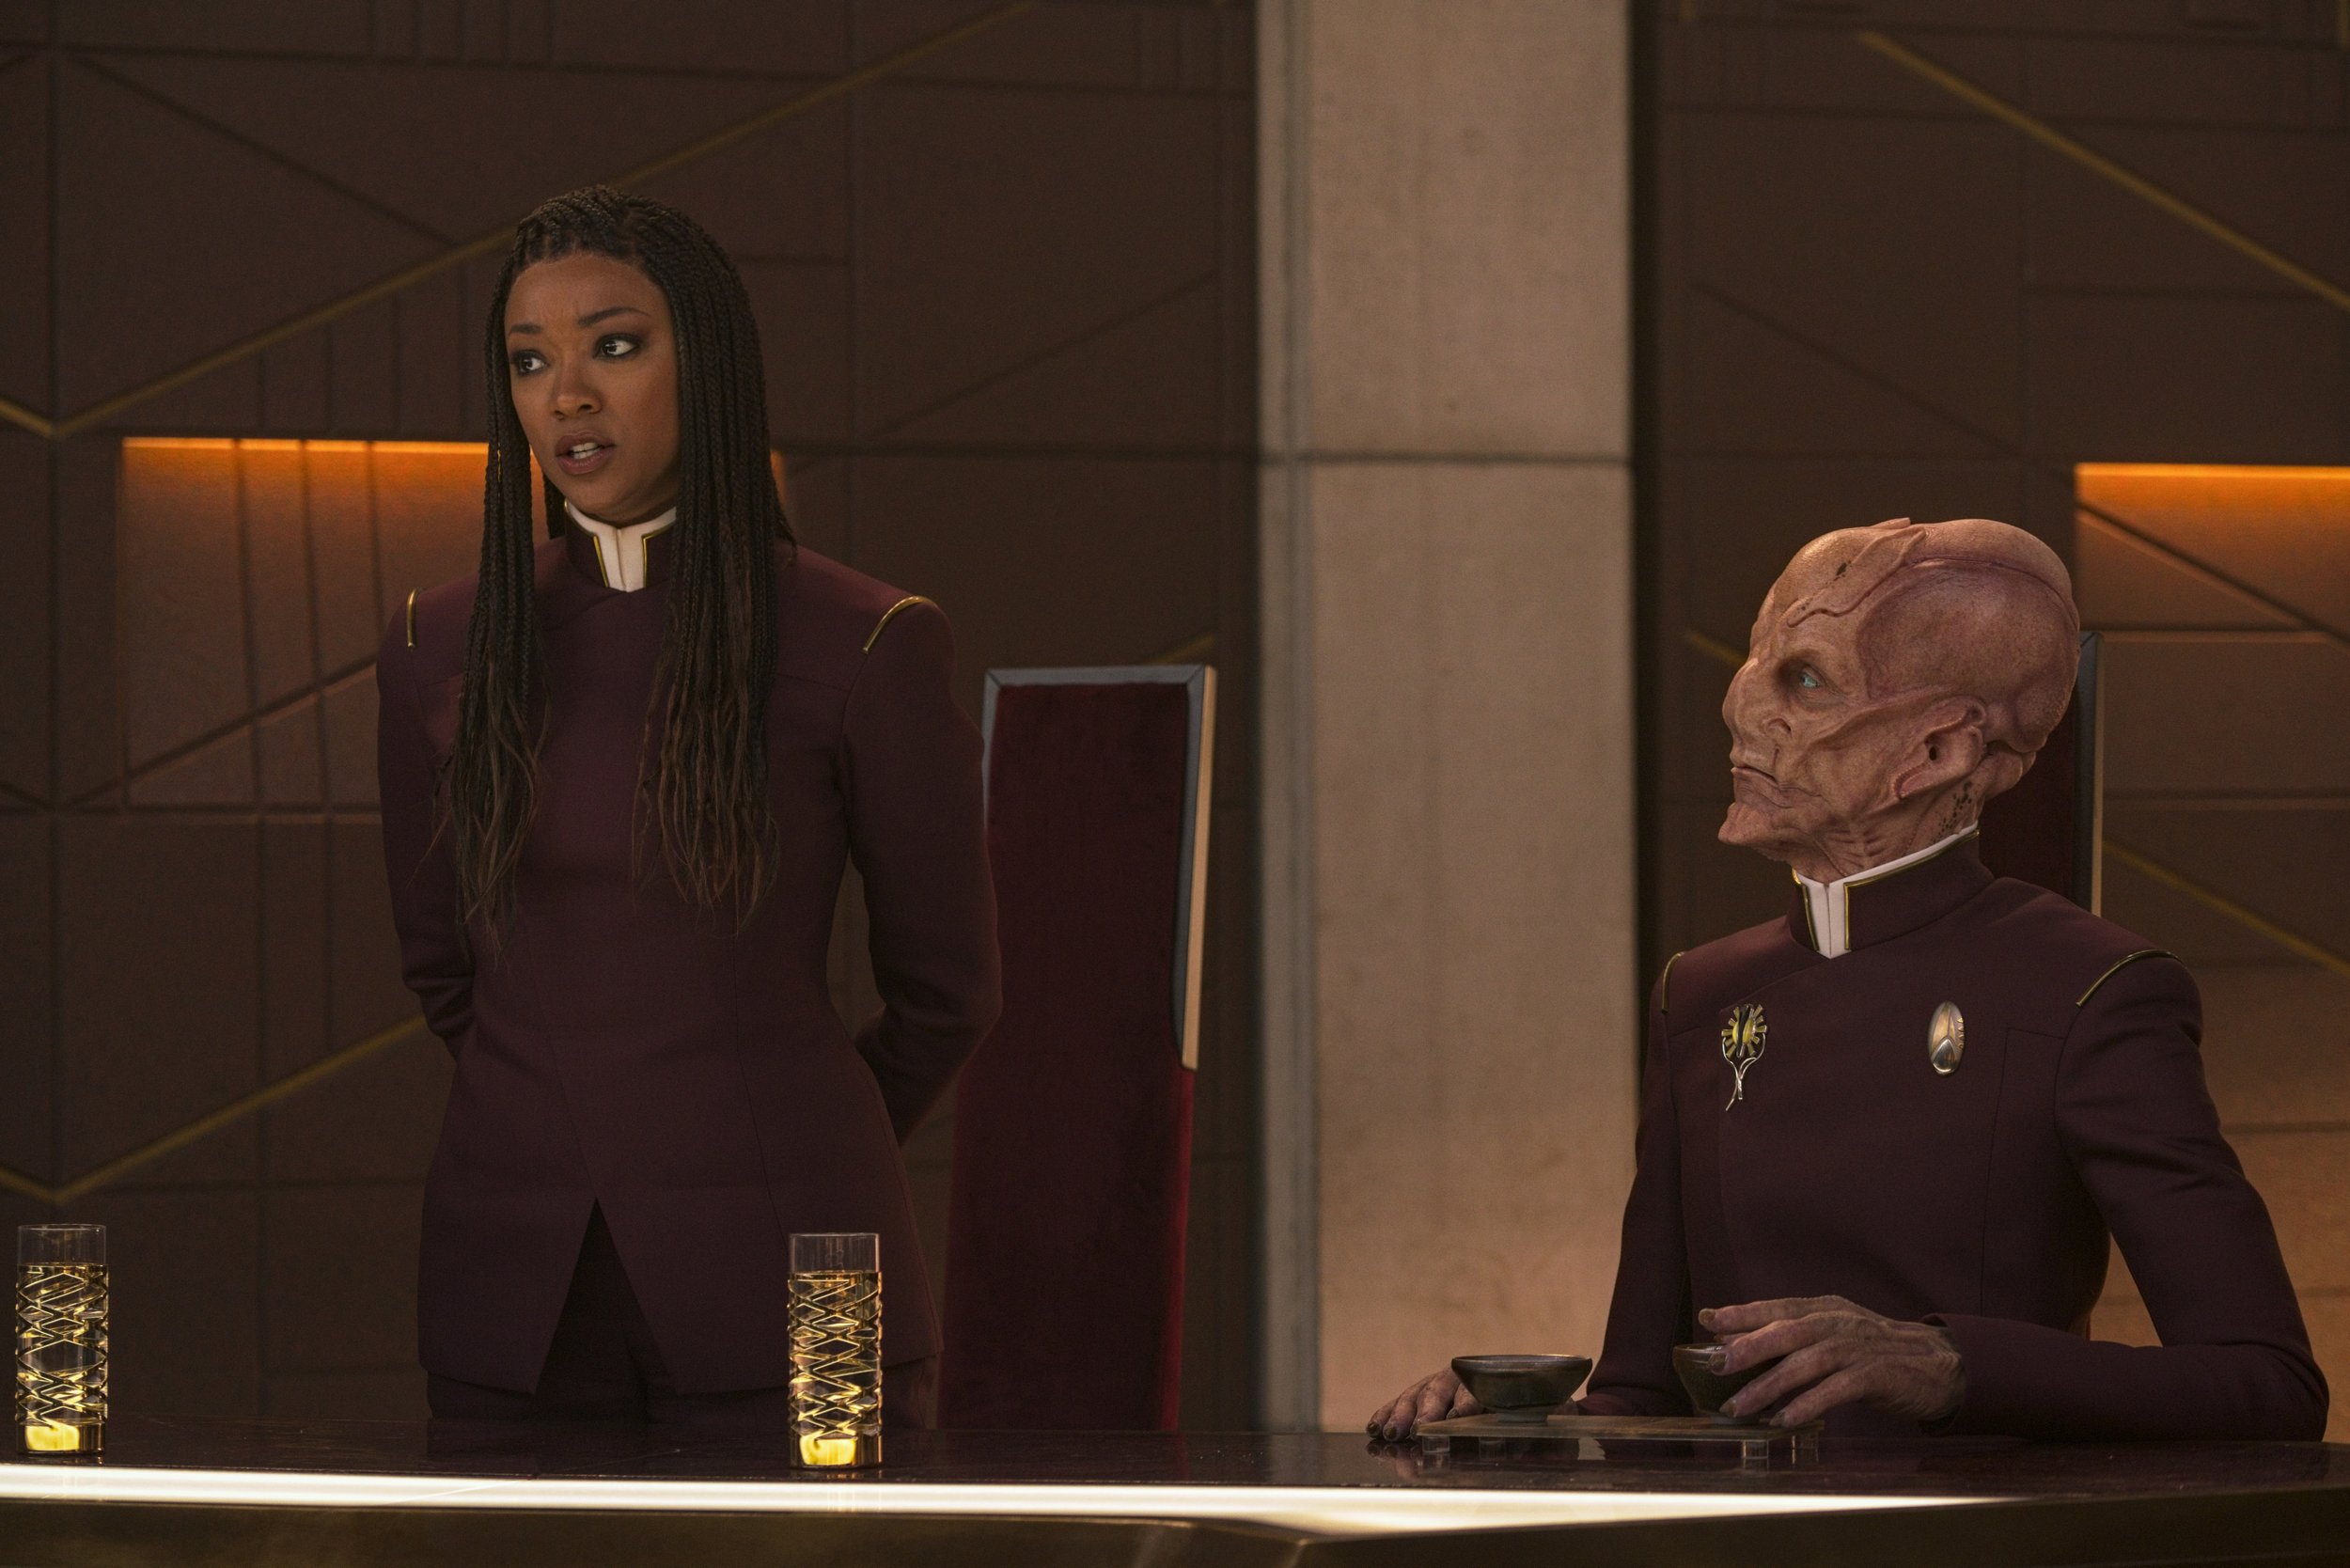   Pictured: Sonequa Martin Green as Burnham and Doug Jones as Saru of the Paramount+ original series STAR TREK: DISCOVERY. Photo Cr: Michael Gibson/Paramount+ © 2021 CBS Interactive. All Rights Reserved.  